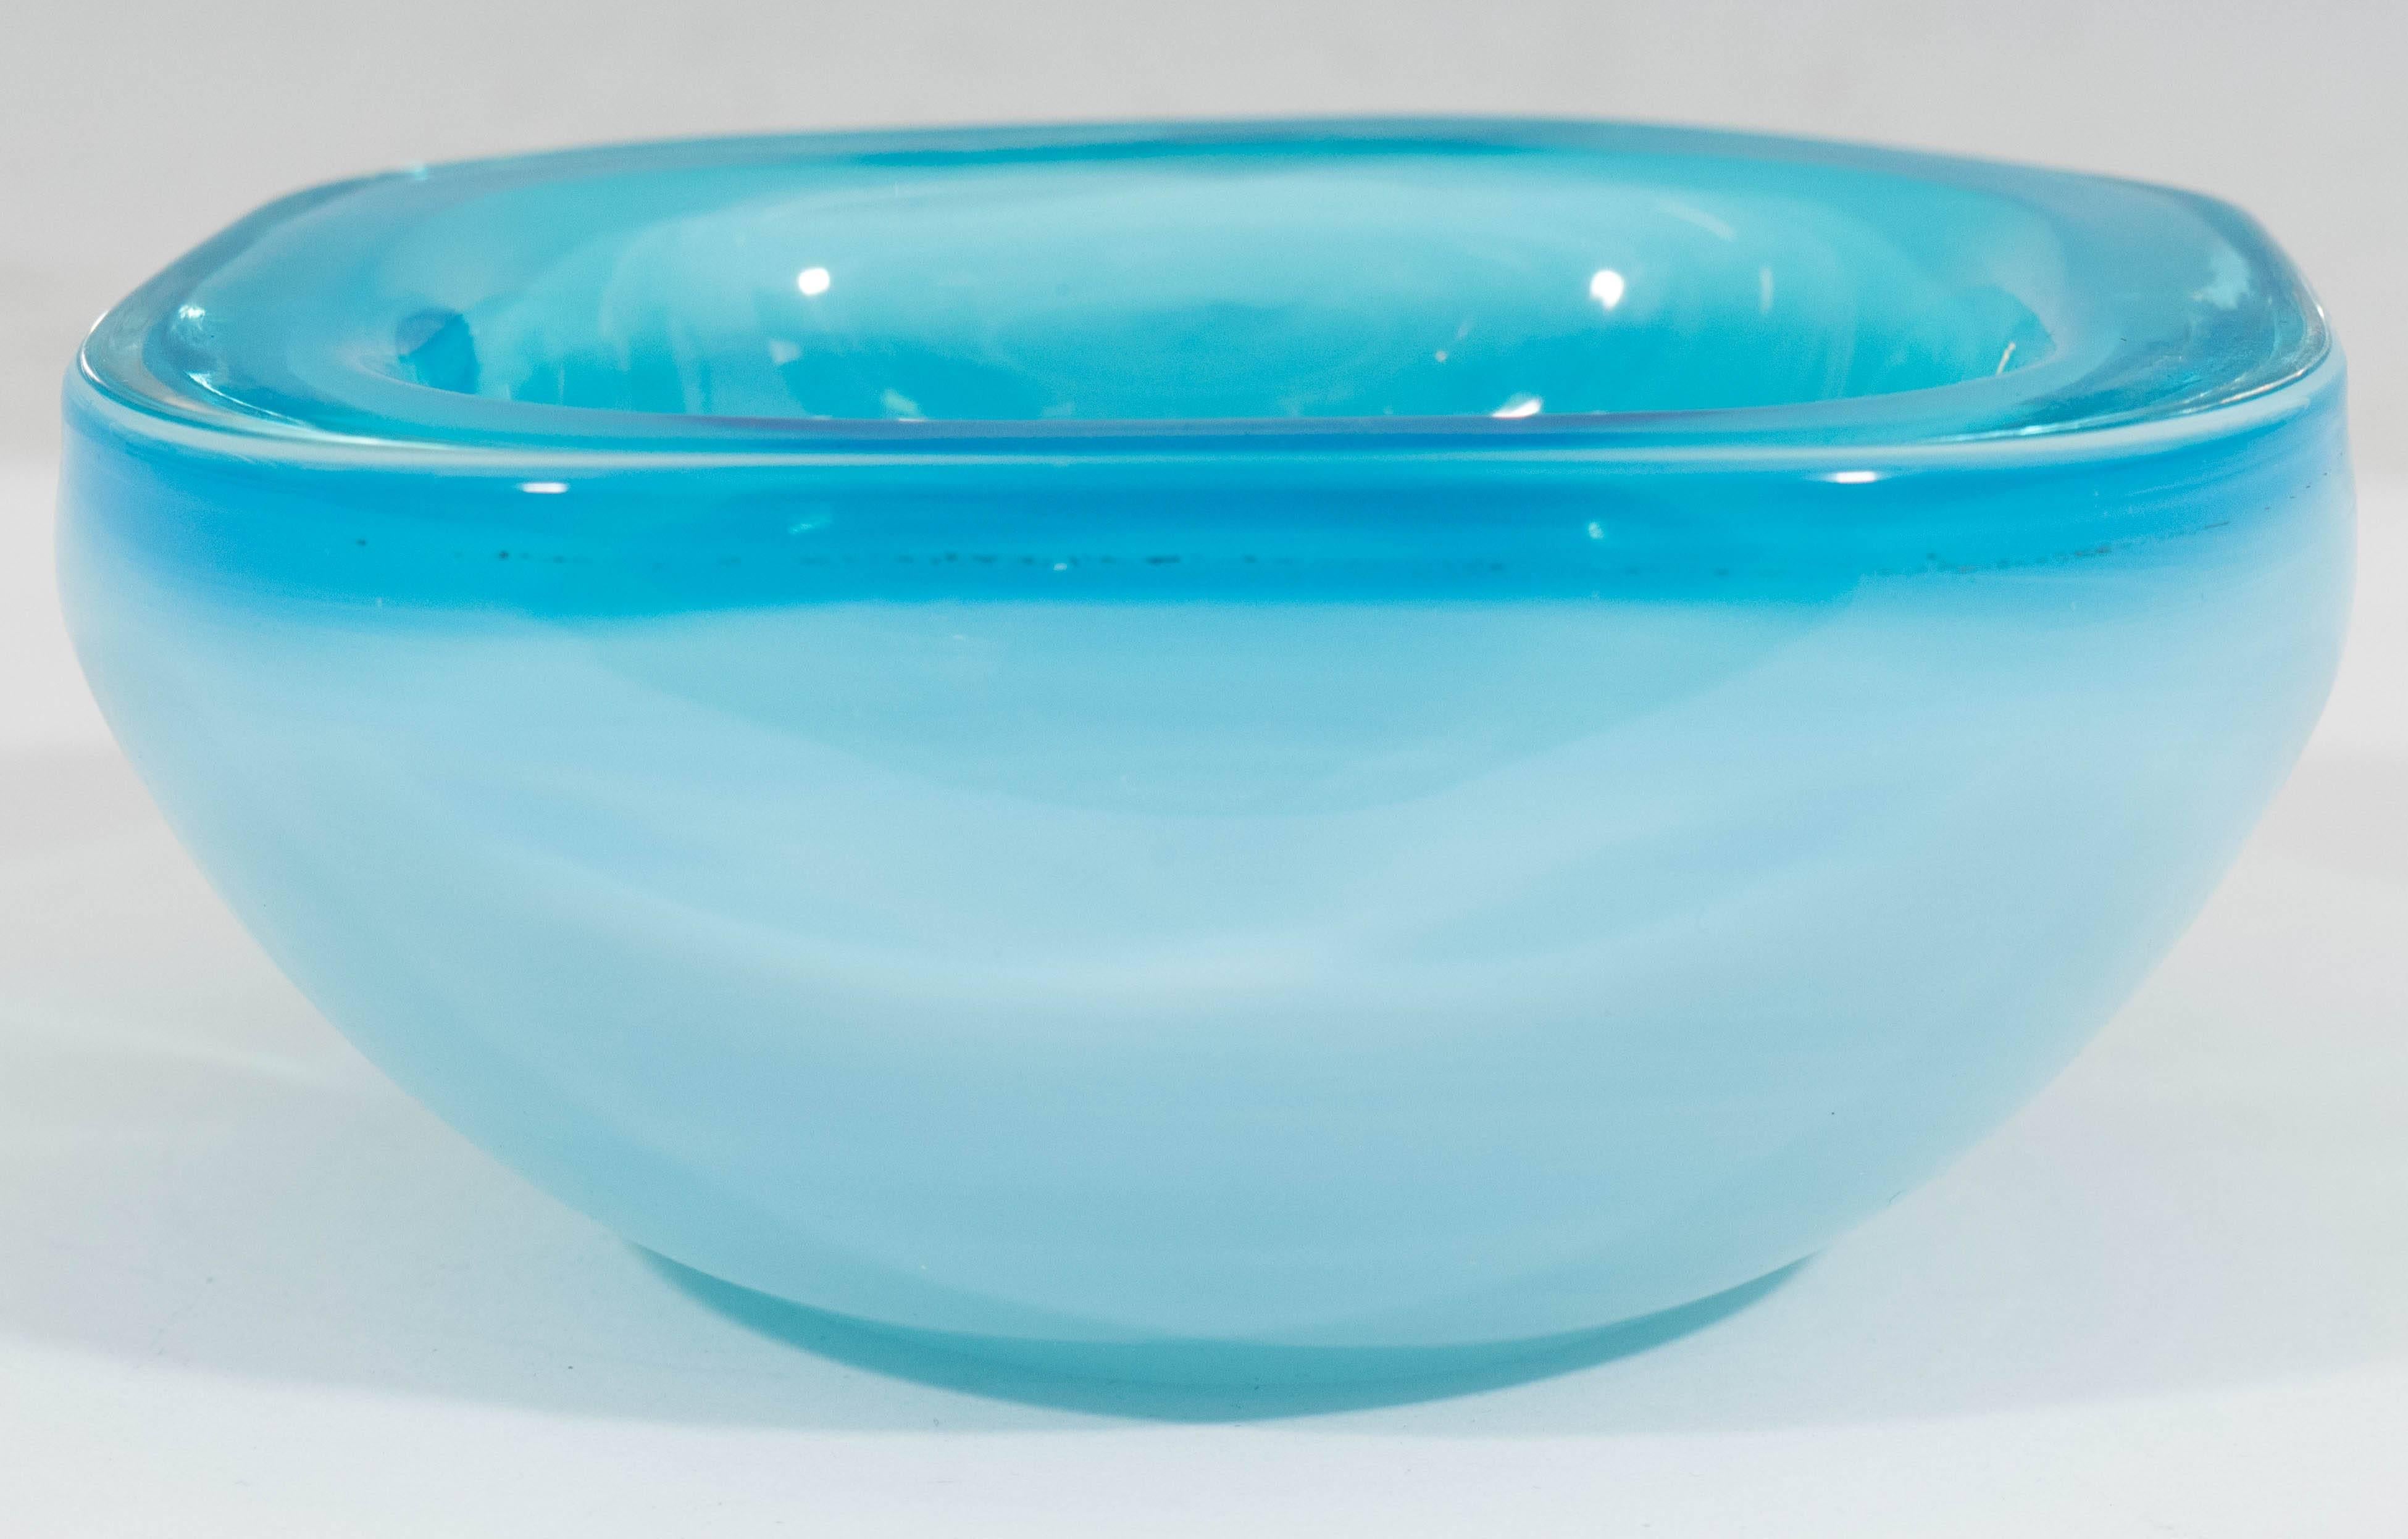 An Italian handblown glass bowl from the Midcentury period, in brilliant blue opaline Murano glass, with thick square shaped corners on a rounded base. Markings include remnants of original label to the bottom. This bowl remains in excellent vintage